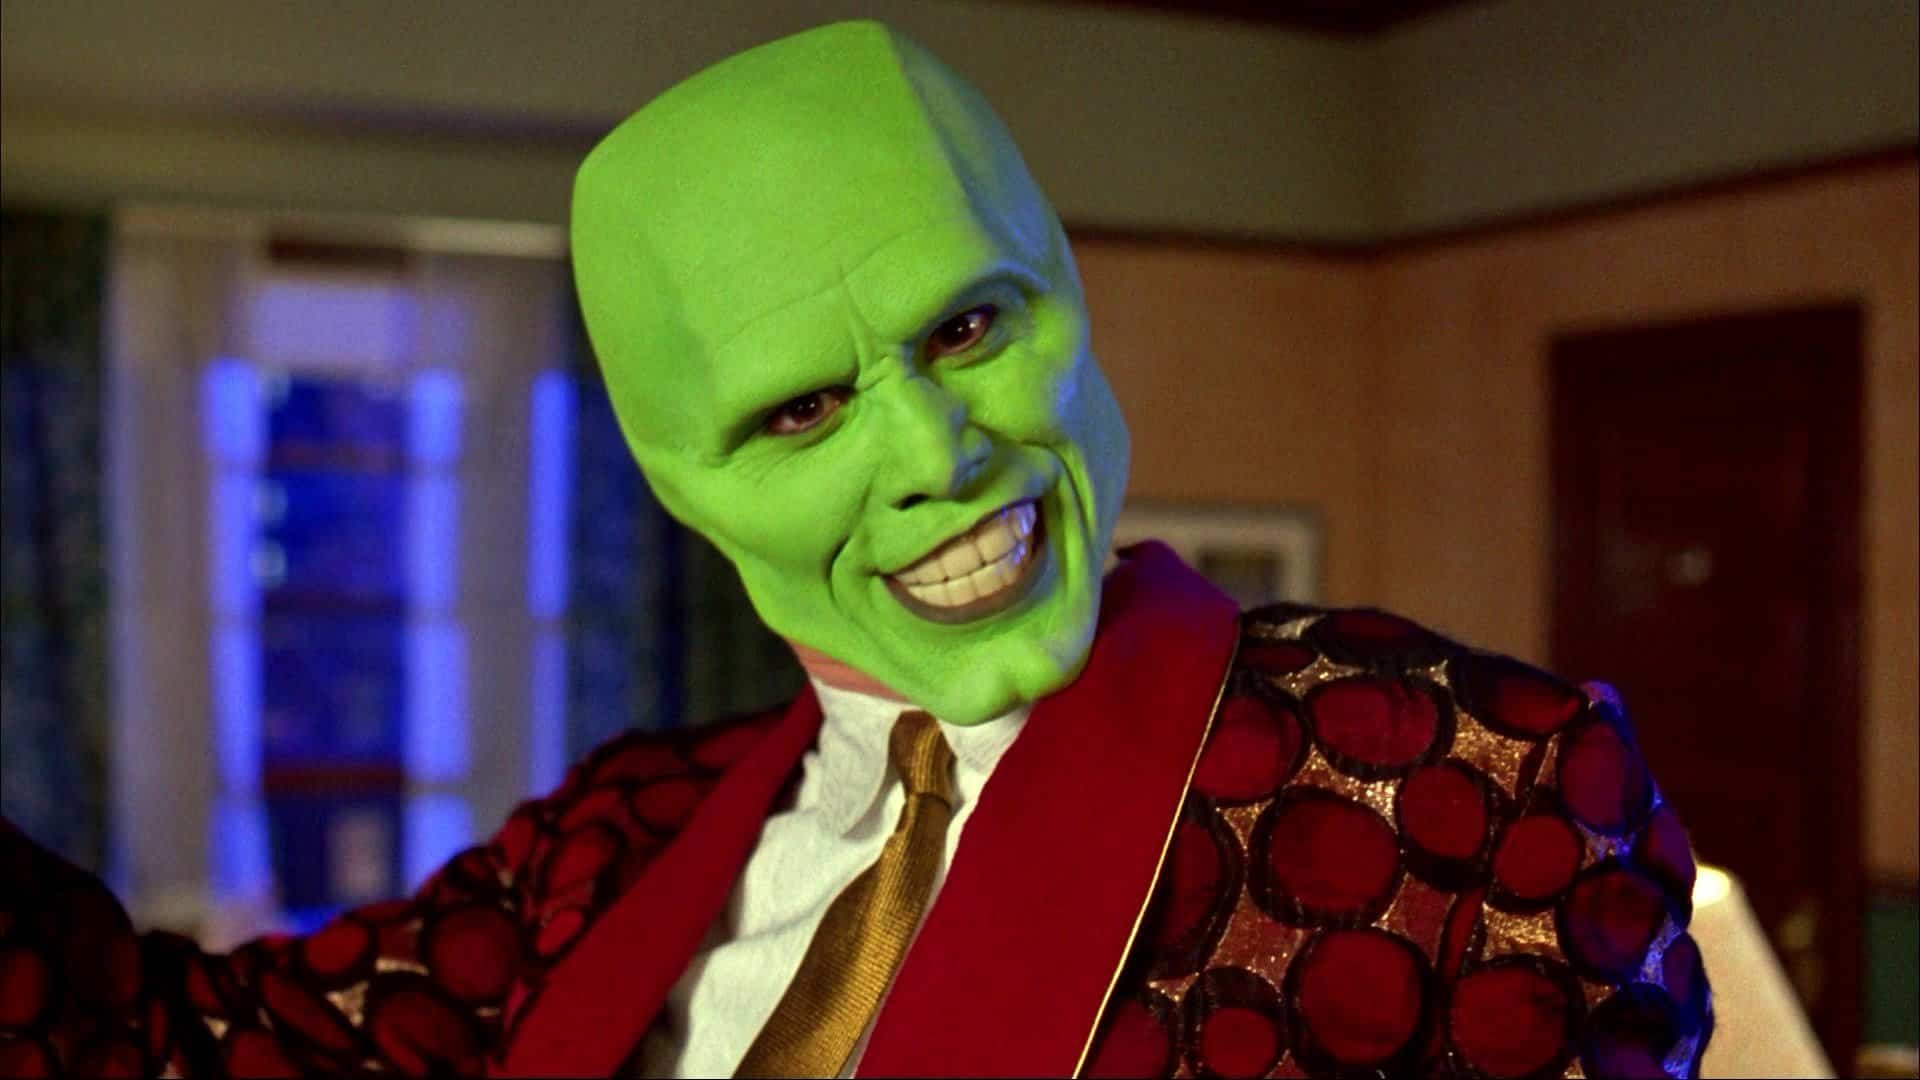 The Mask 2: Jim Carrey to Return for a